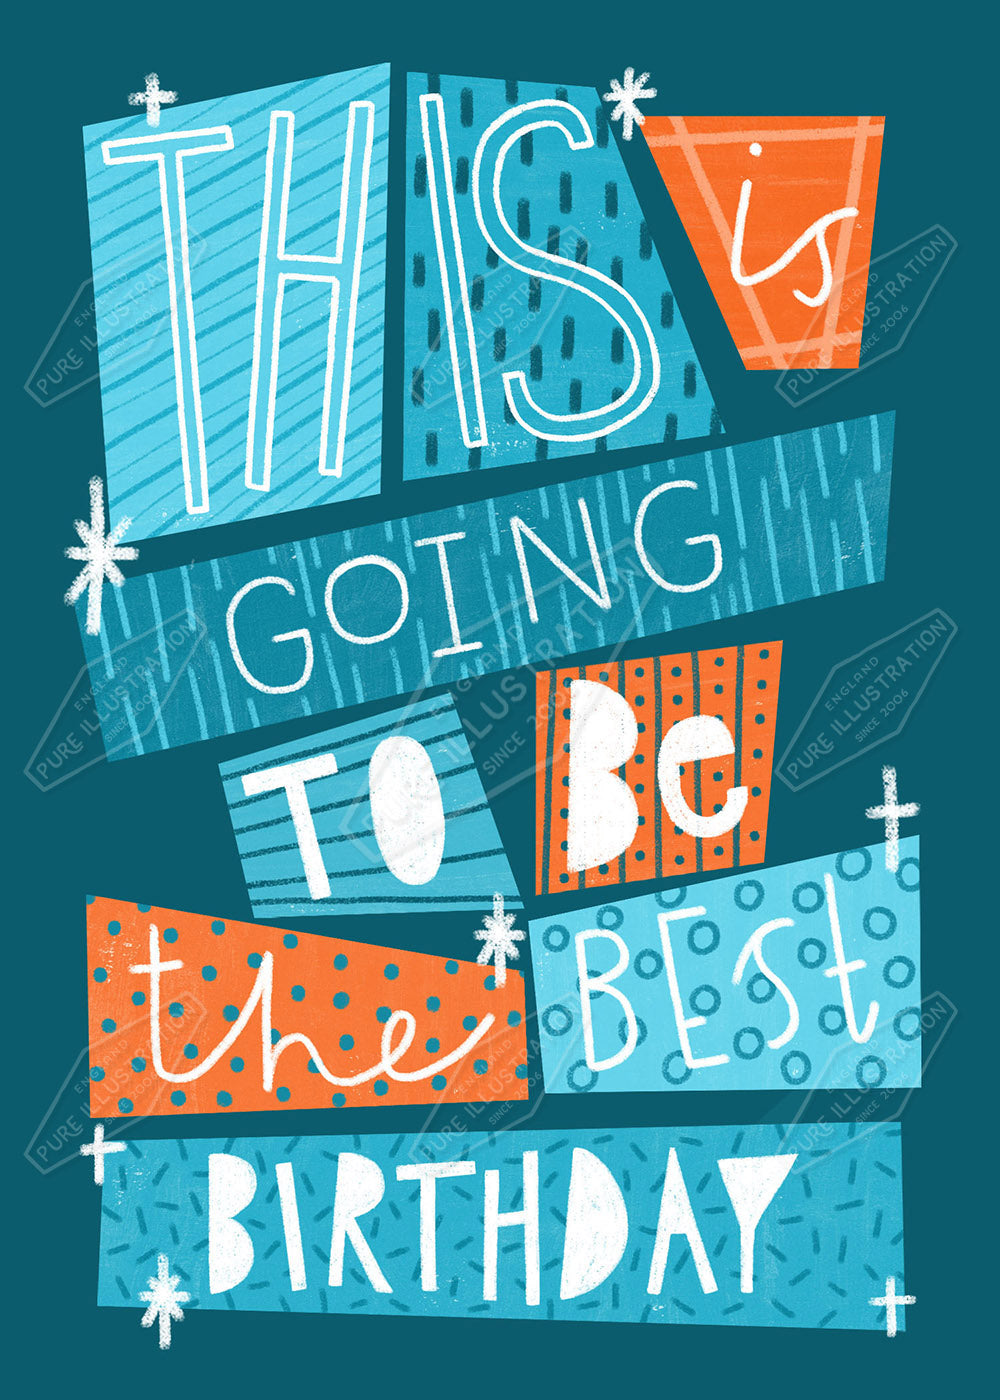 Text Birthday Greeting Card Design - by Leah Brideaux - Pure Art Licensing Agency & Surface Design Studio